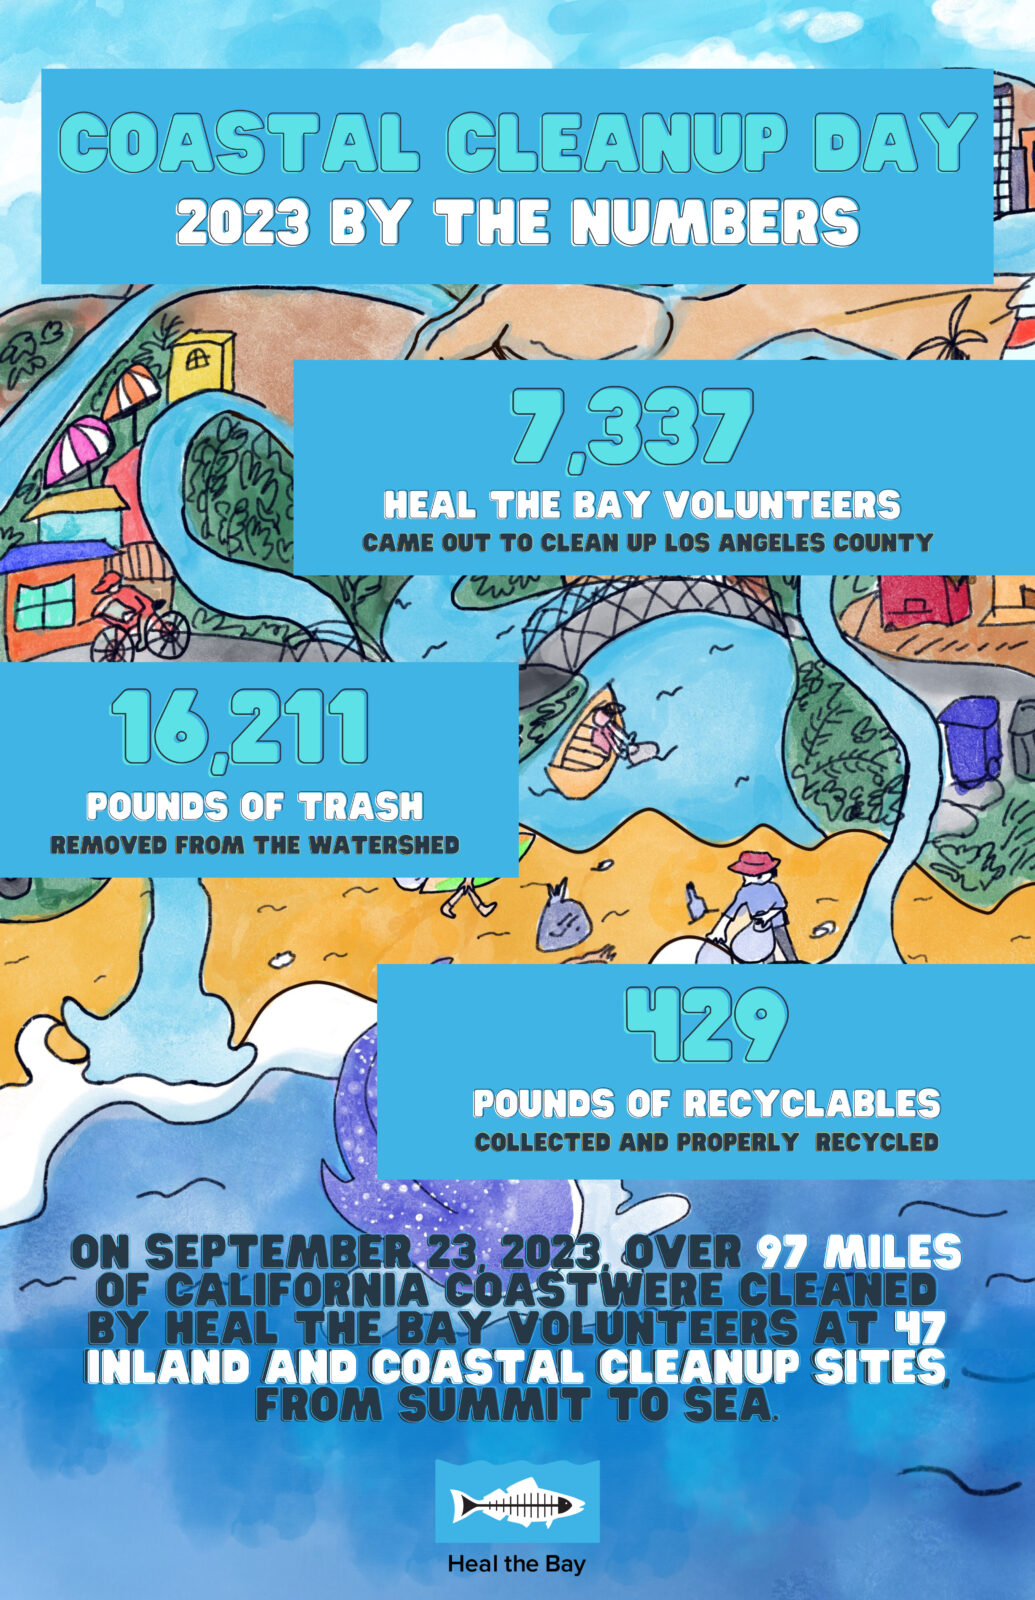 Coastal Cleanup Day 2023 Stats